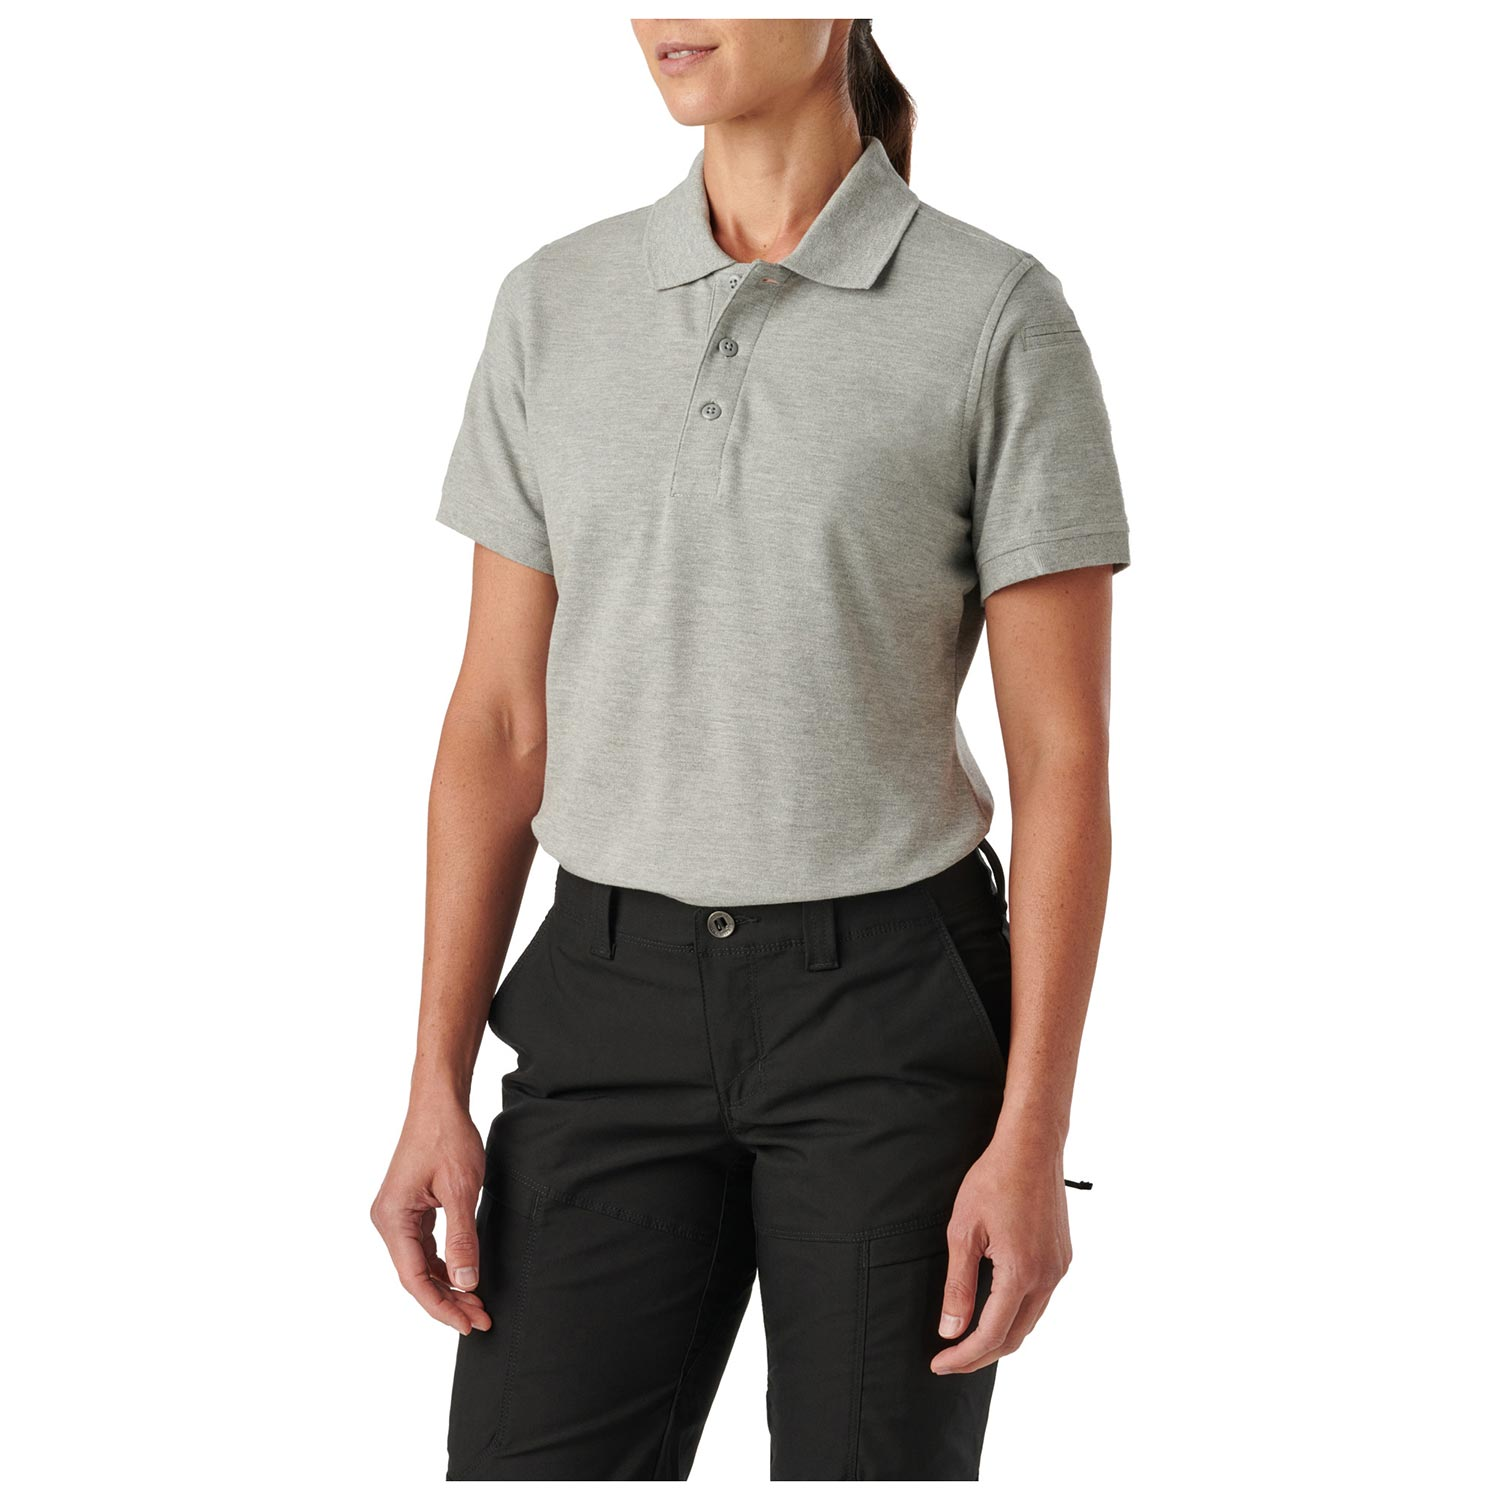 5.11 Tactical Women's Utility Short Sleeve Polo (61173)| The Fire Center | The Fire Store | Store | FREE SHIPPING | An exceptional basic polo, effective for work and casual environments, modeled after the 5.11® Performance Polo series for long lasting comfort. Standard polo shirt for work and off-duty Enhanced comfort and functionality Designed and crafted